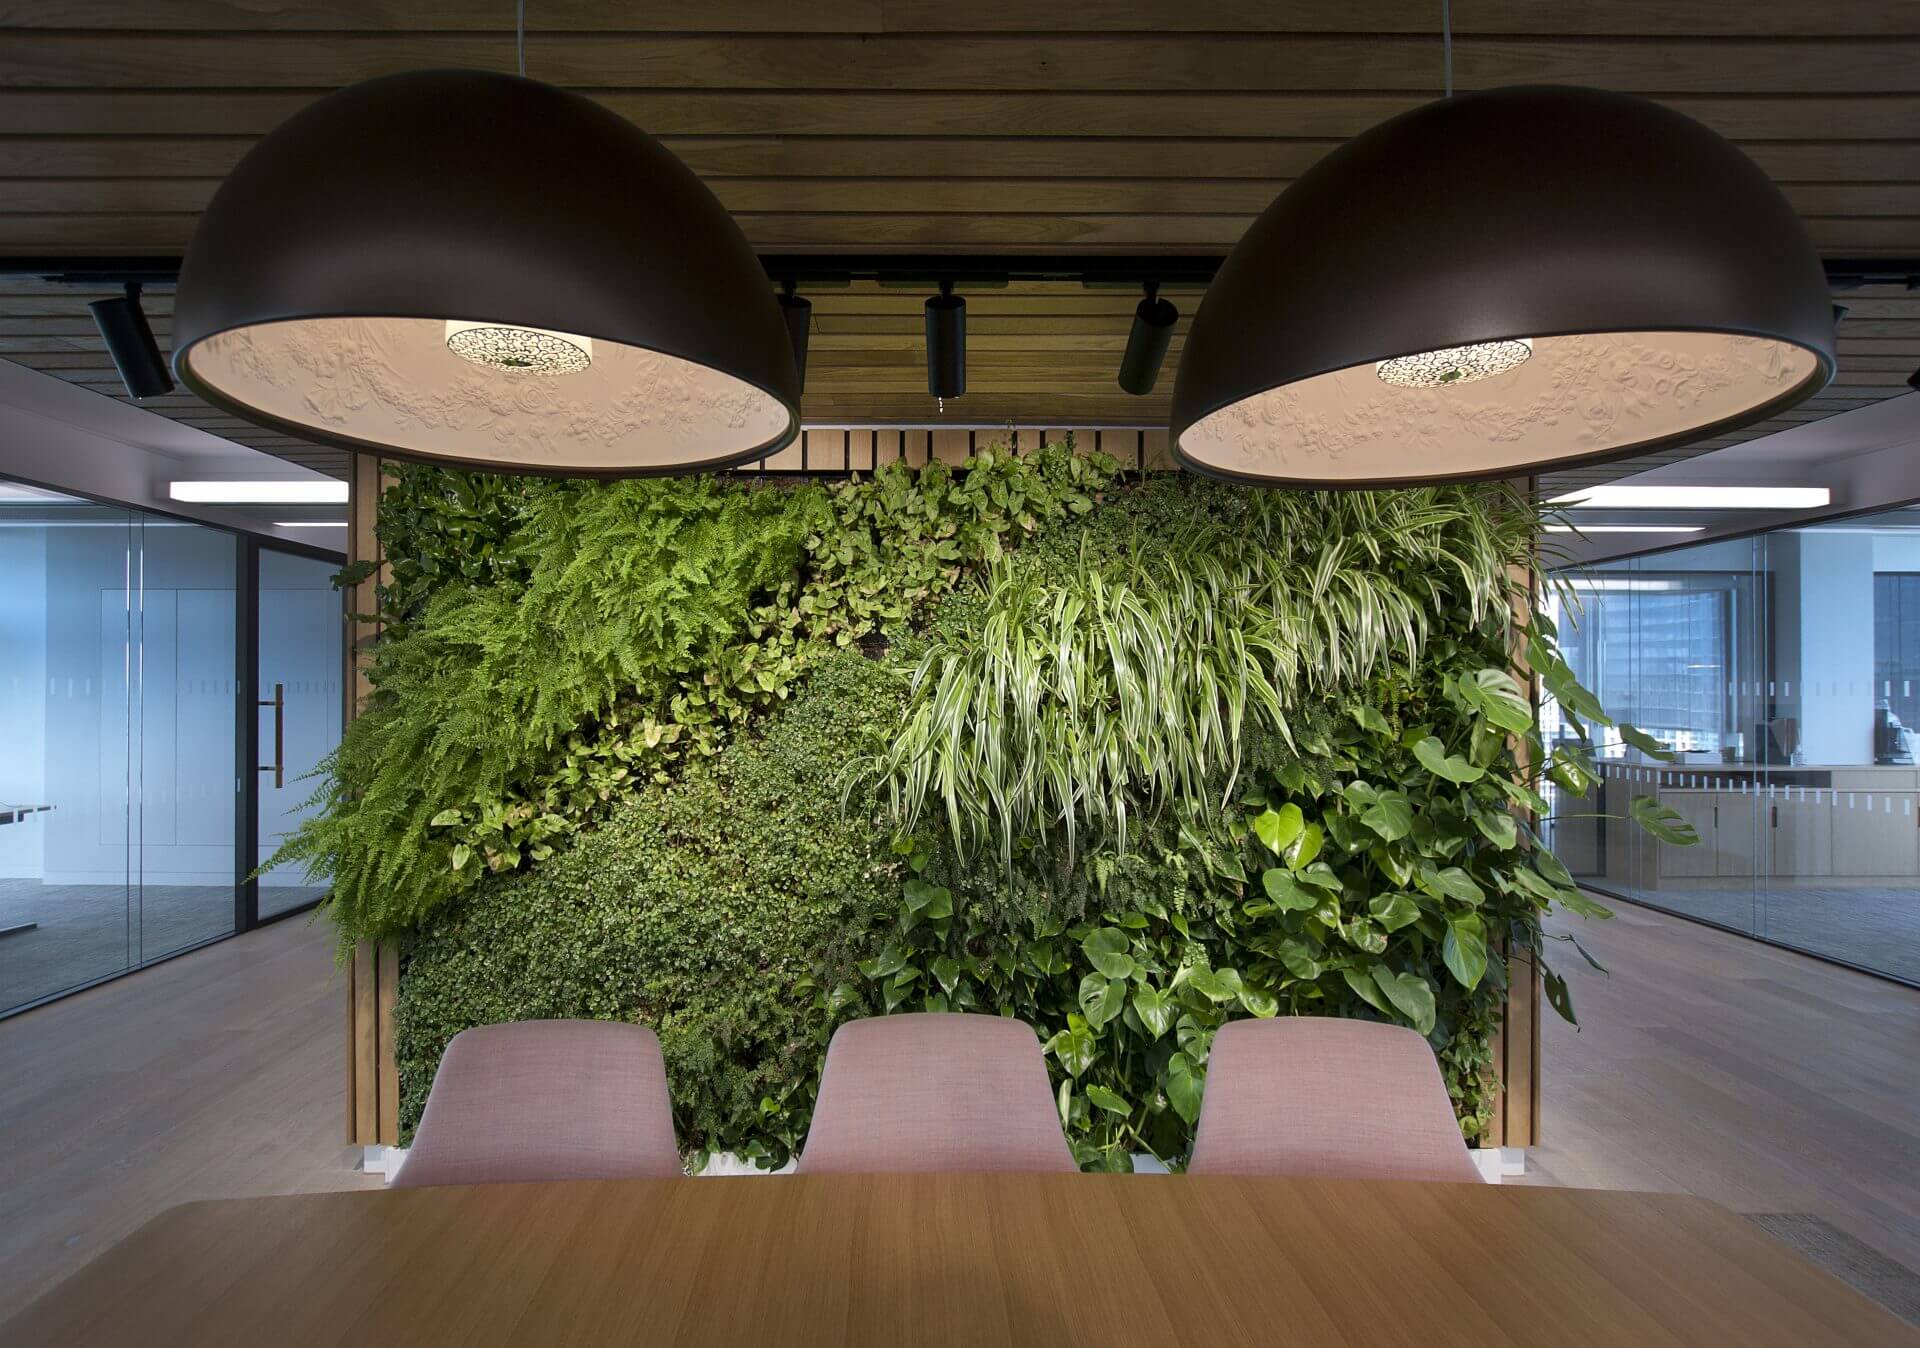 Image of the stunning biophilic design of JAB Holding Company's office, featuring natural elements such as plants, living walls, and high ceilings to create a tranquil and inviting atmosphere for employees.